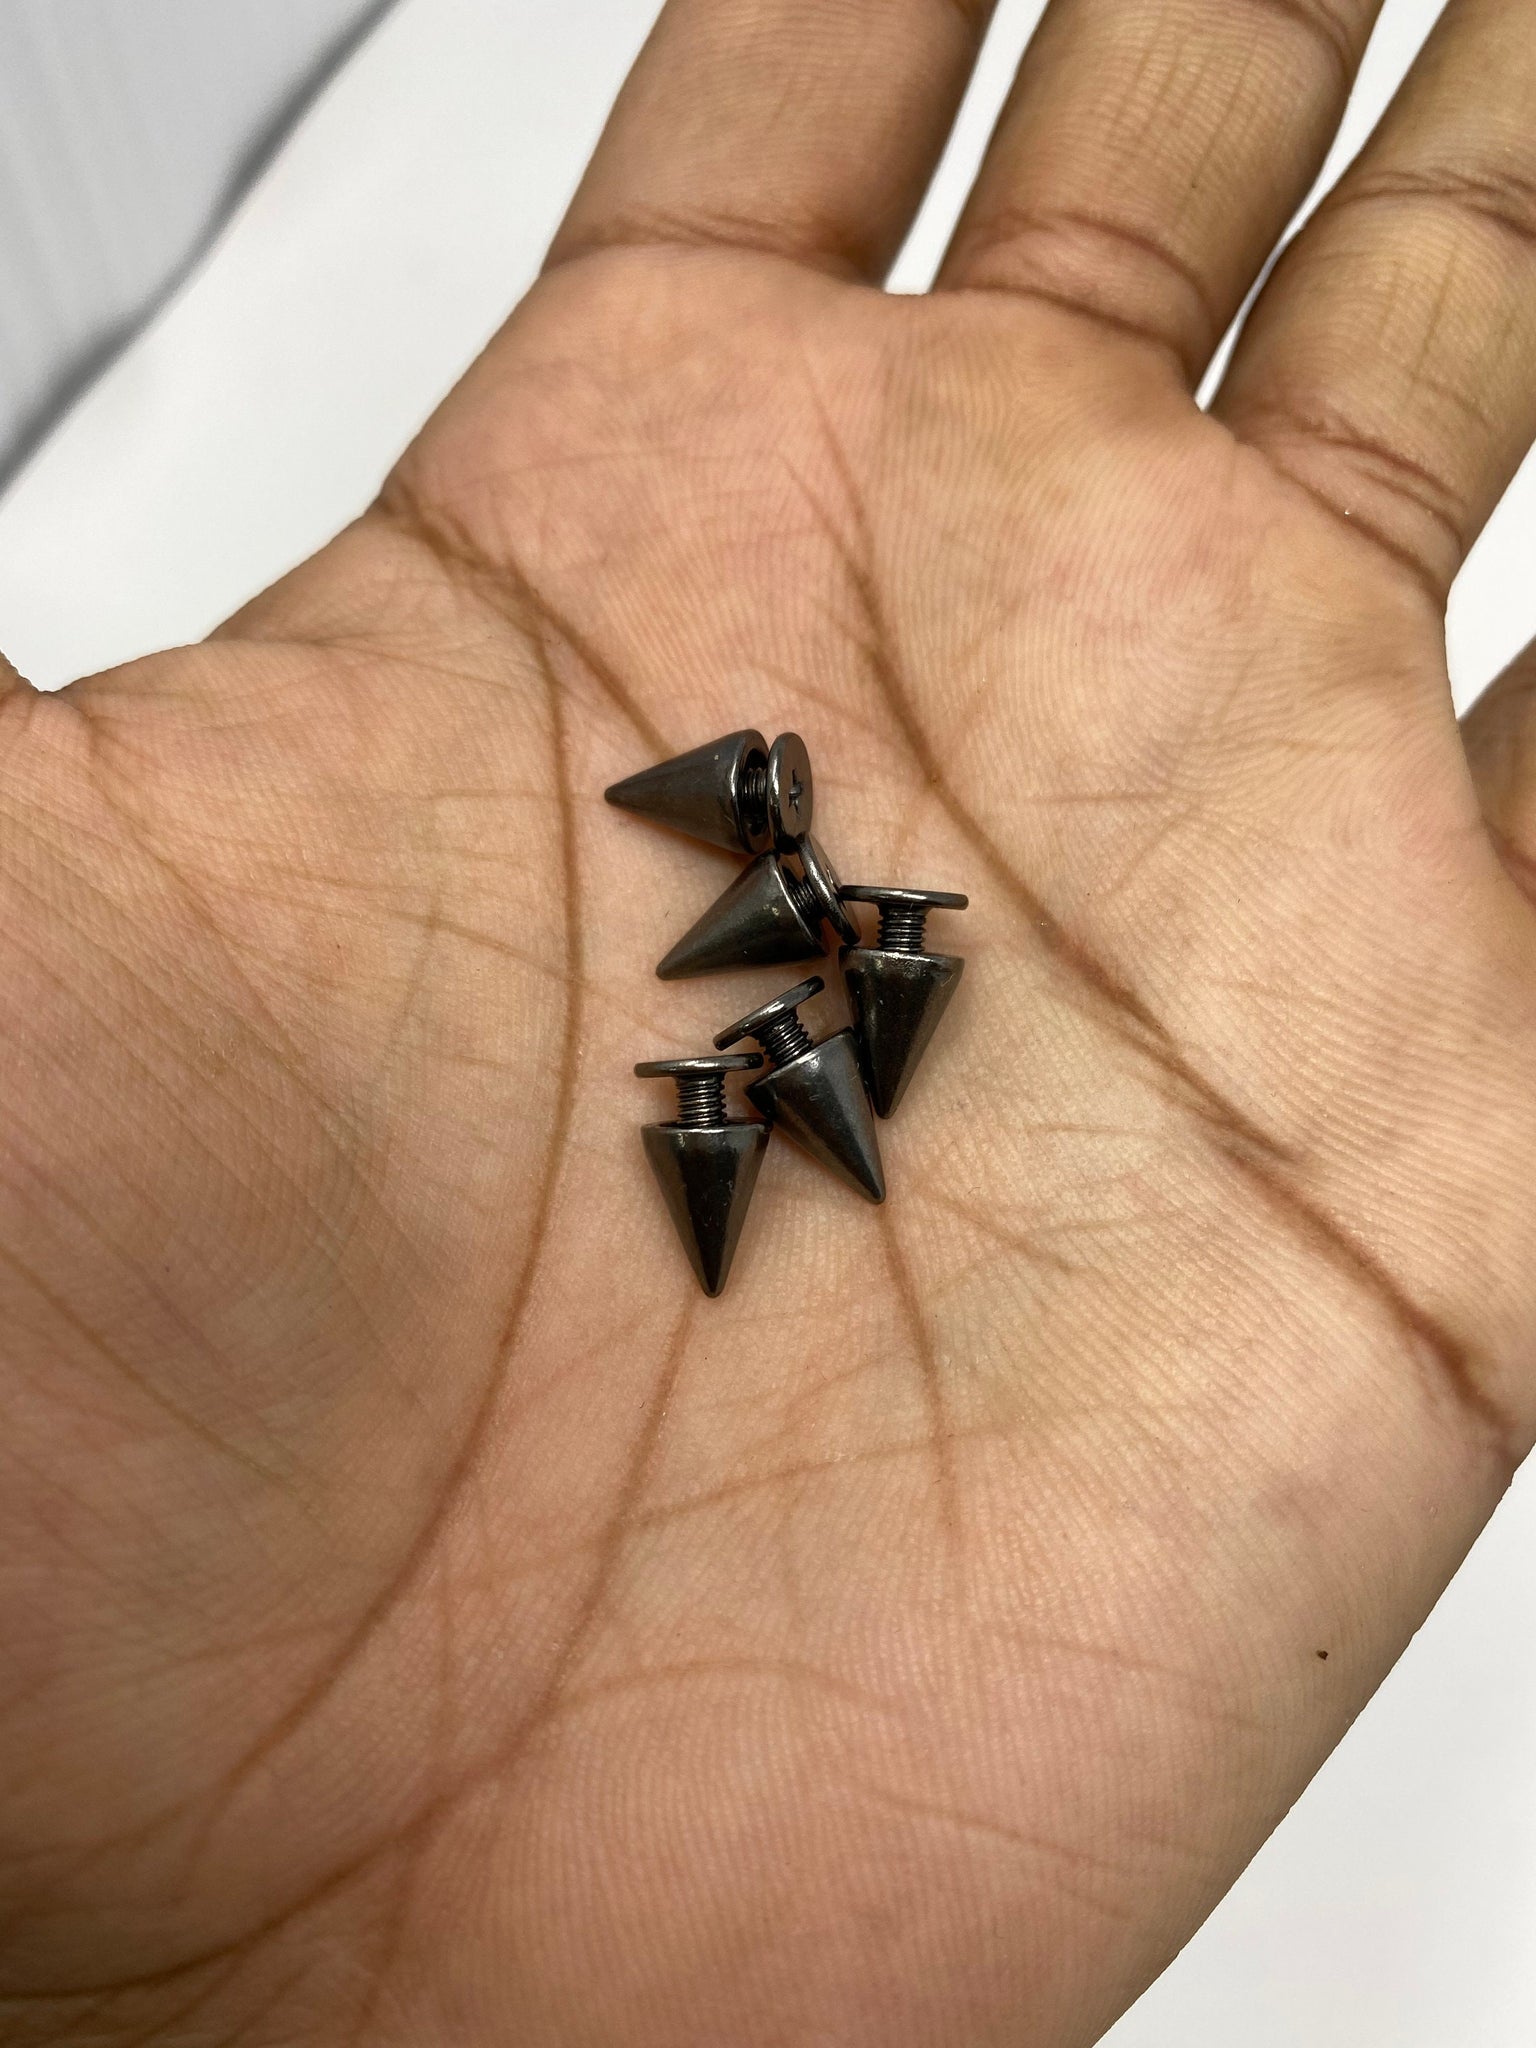 NEW, Screw on Spikes, 10mm 3/8 Black Spiked Studs, Cone Spikes